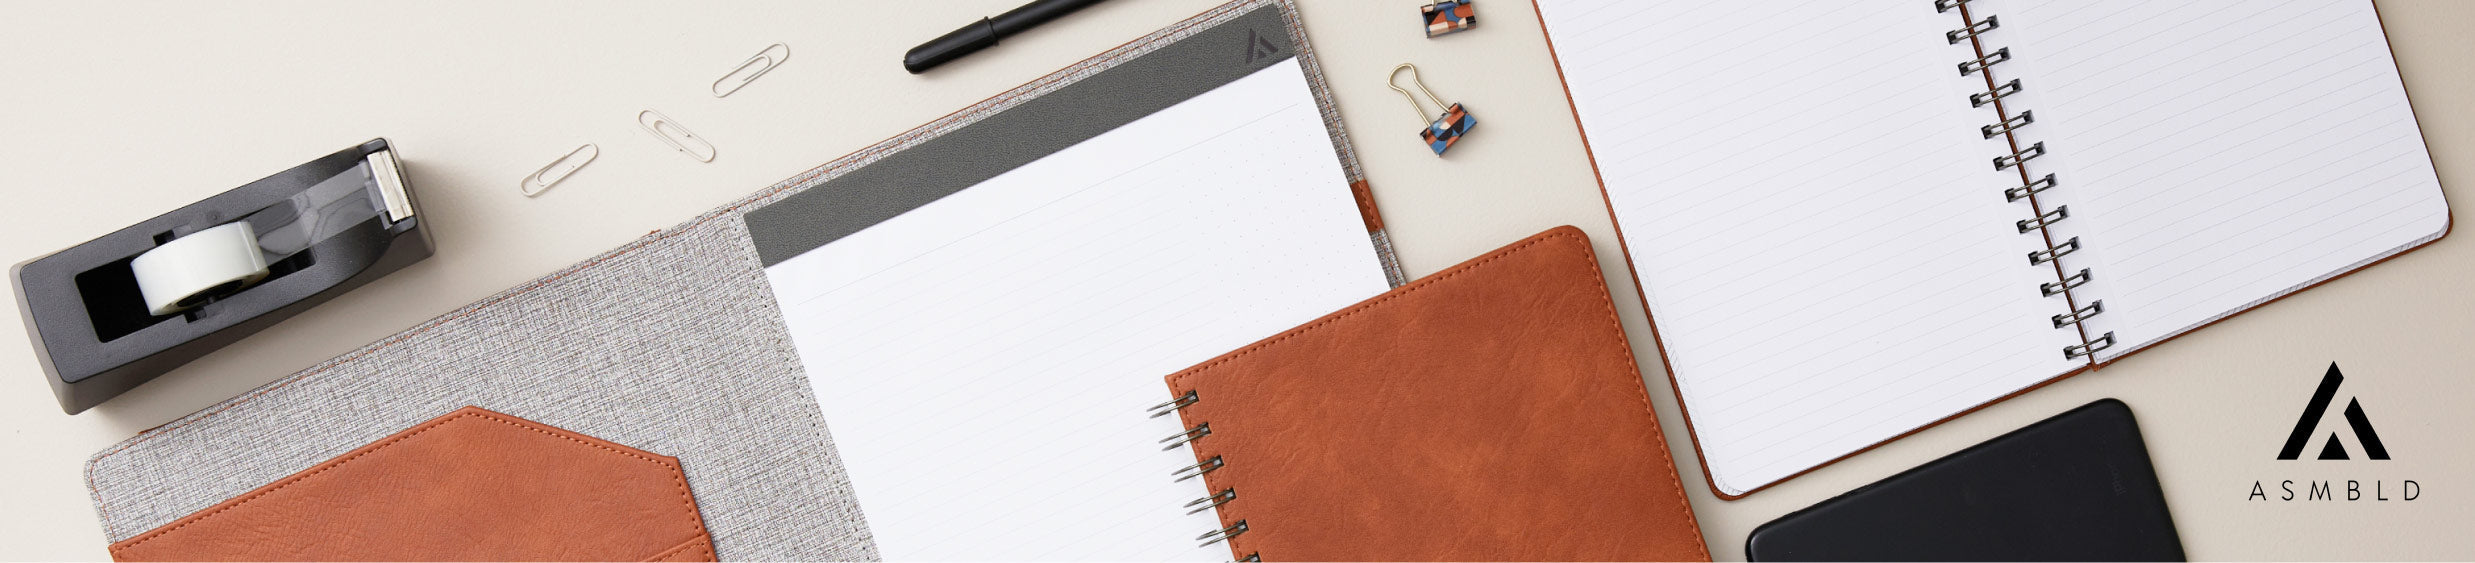 An array of ASMBLD notebooks, leather-bound planners and office supplies